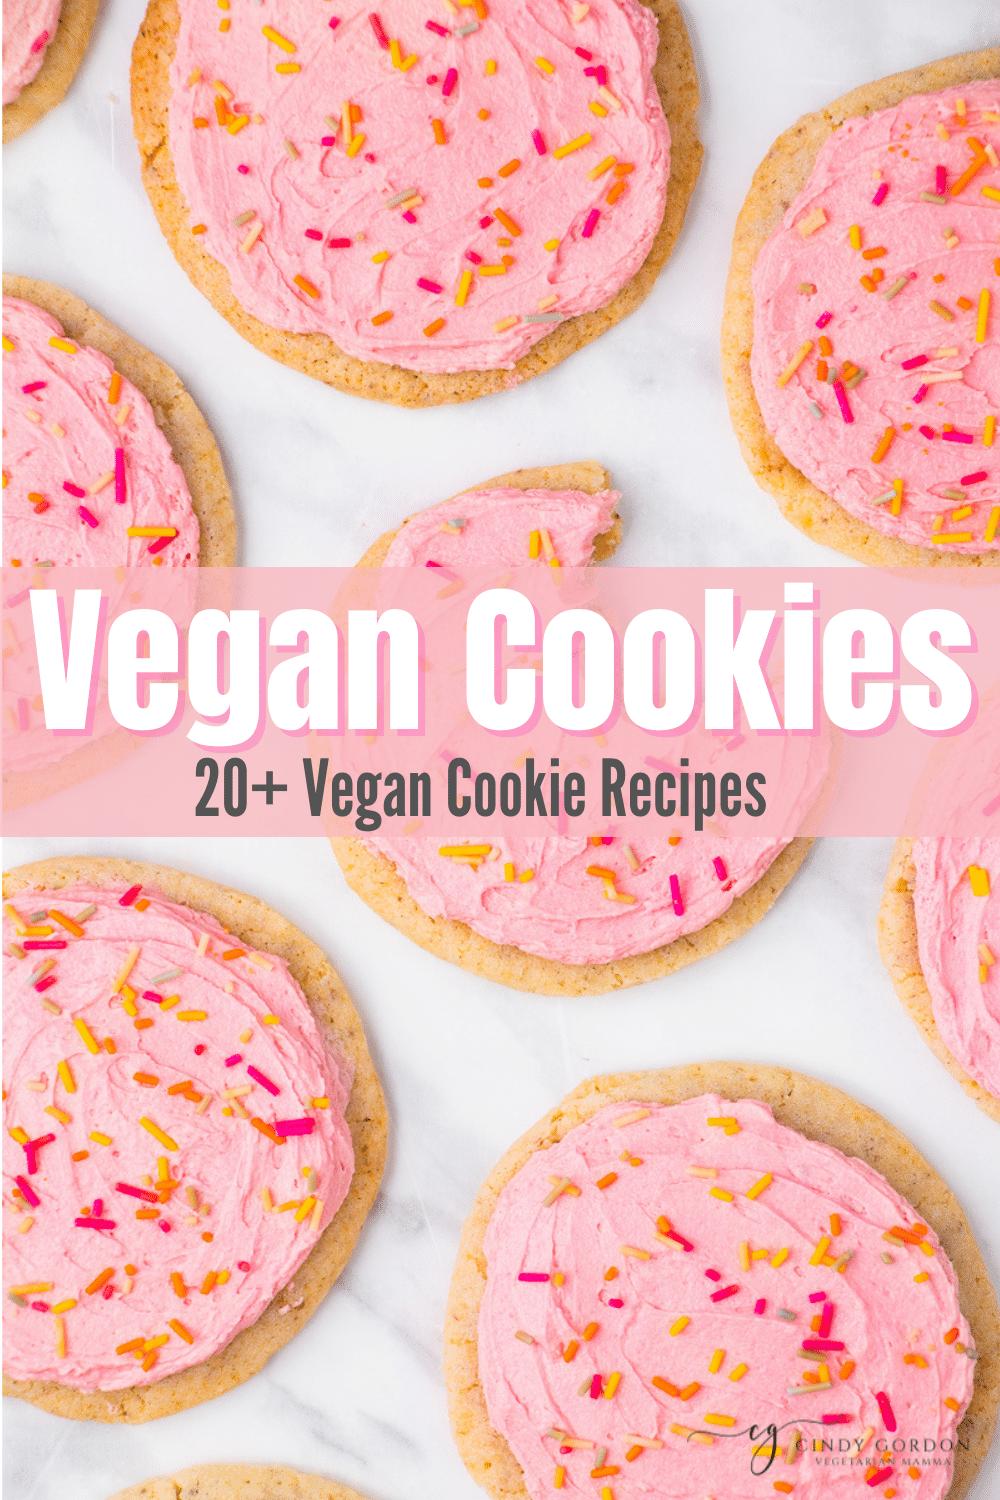 These vegan cookies are so easy to make with no dairy or eggs! From simple chocolate chip cookies to festive Christmas cookie recipes, you will find everything you need here for the best vegan cookies. Read on to learn how to make over 20 vegan cookie recipes. #vegancookies #cookies #dairyfreecookies #eggfreecookies